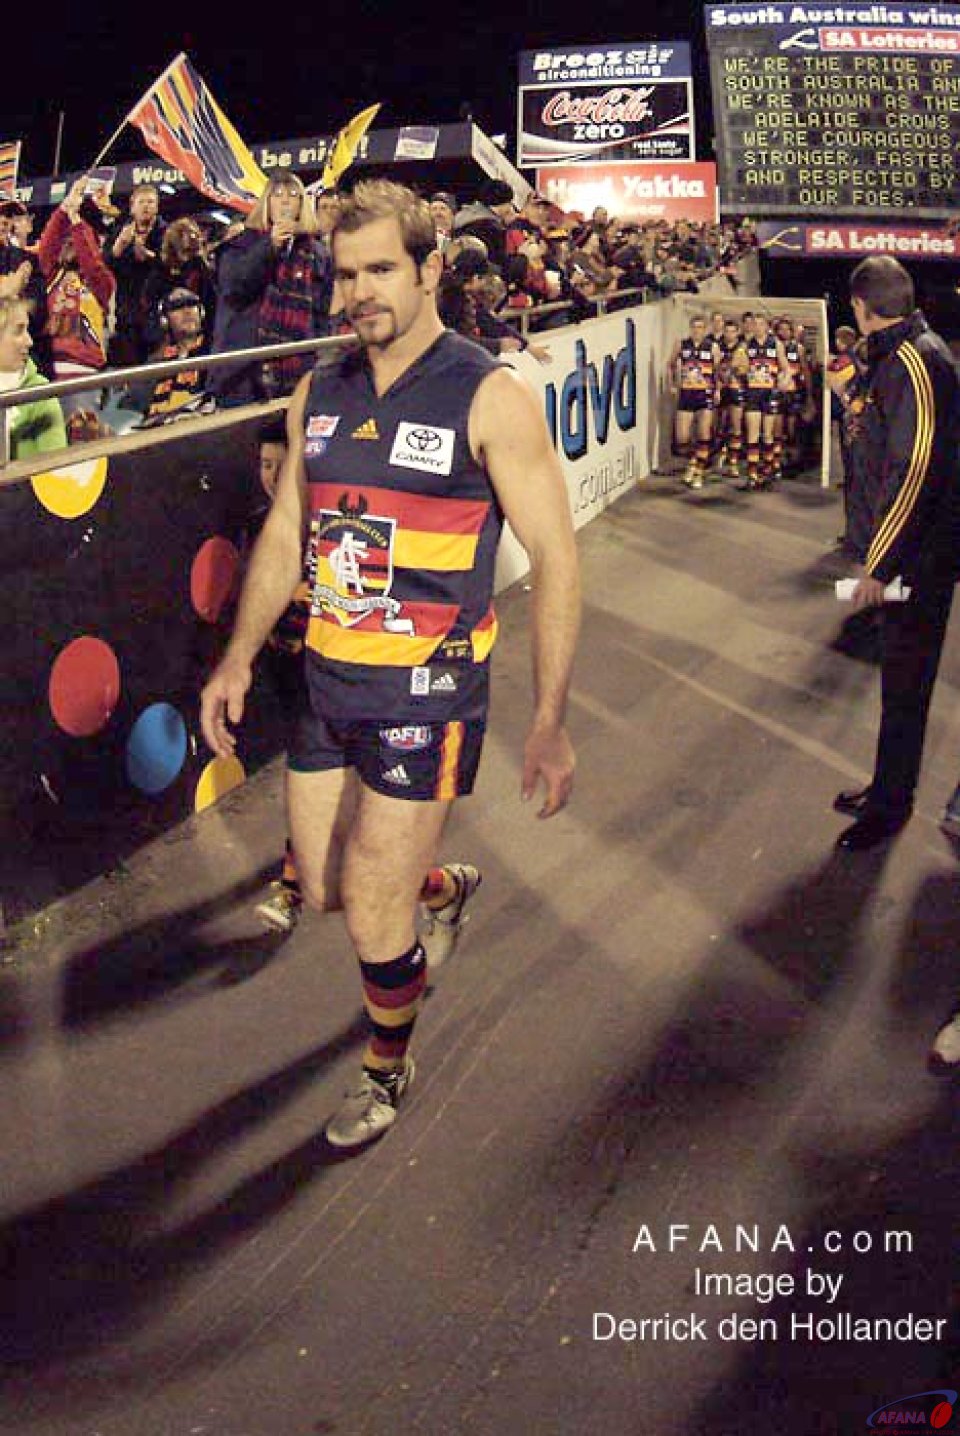 [b]Adelaide Crows captain, and Brownlow Medallist Mark Riciutto leads the players onto the field in his 300th game.[/b]